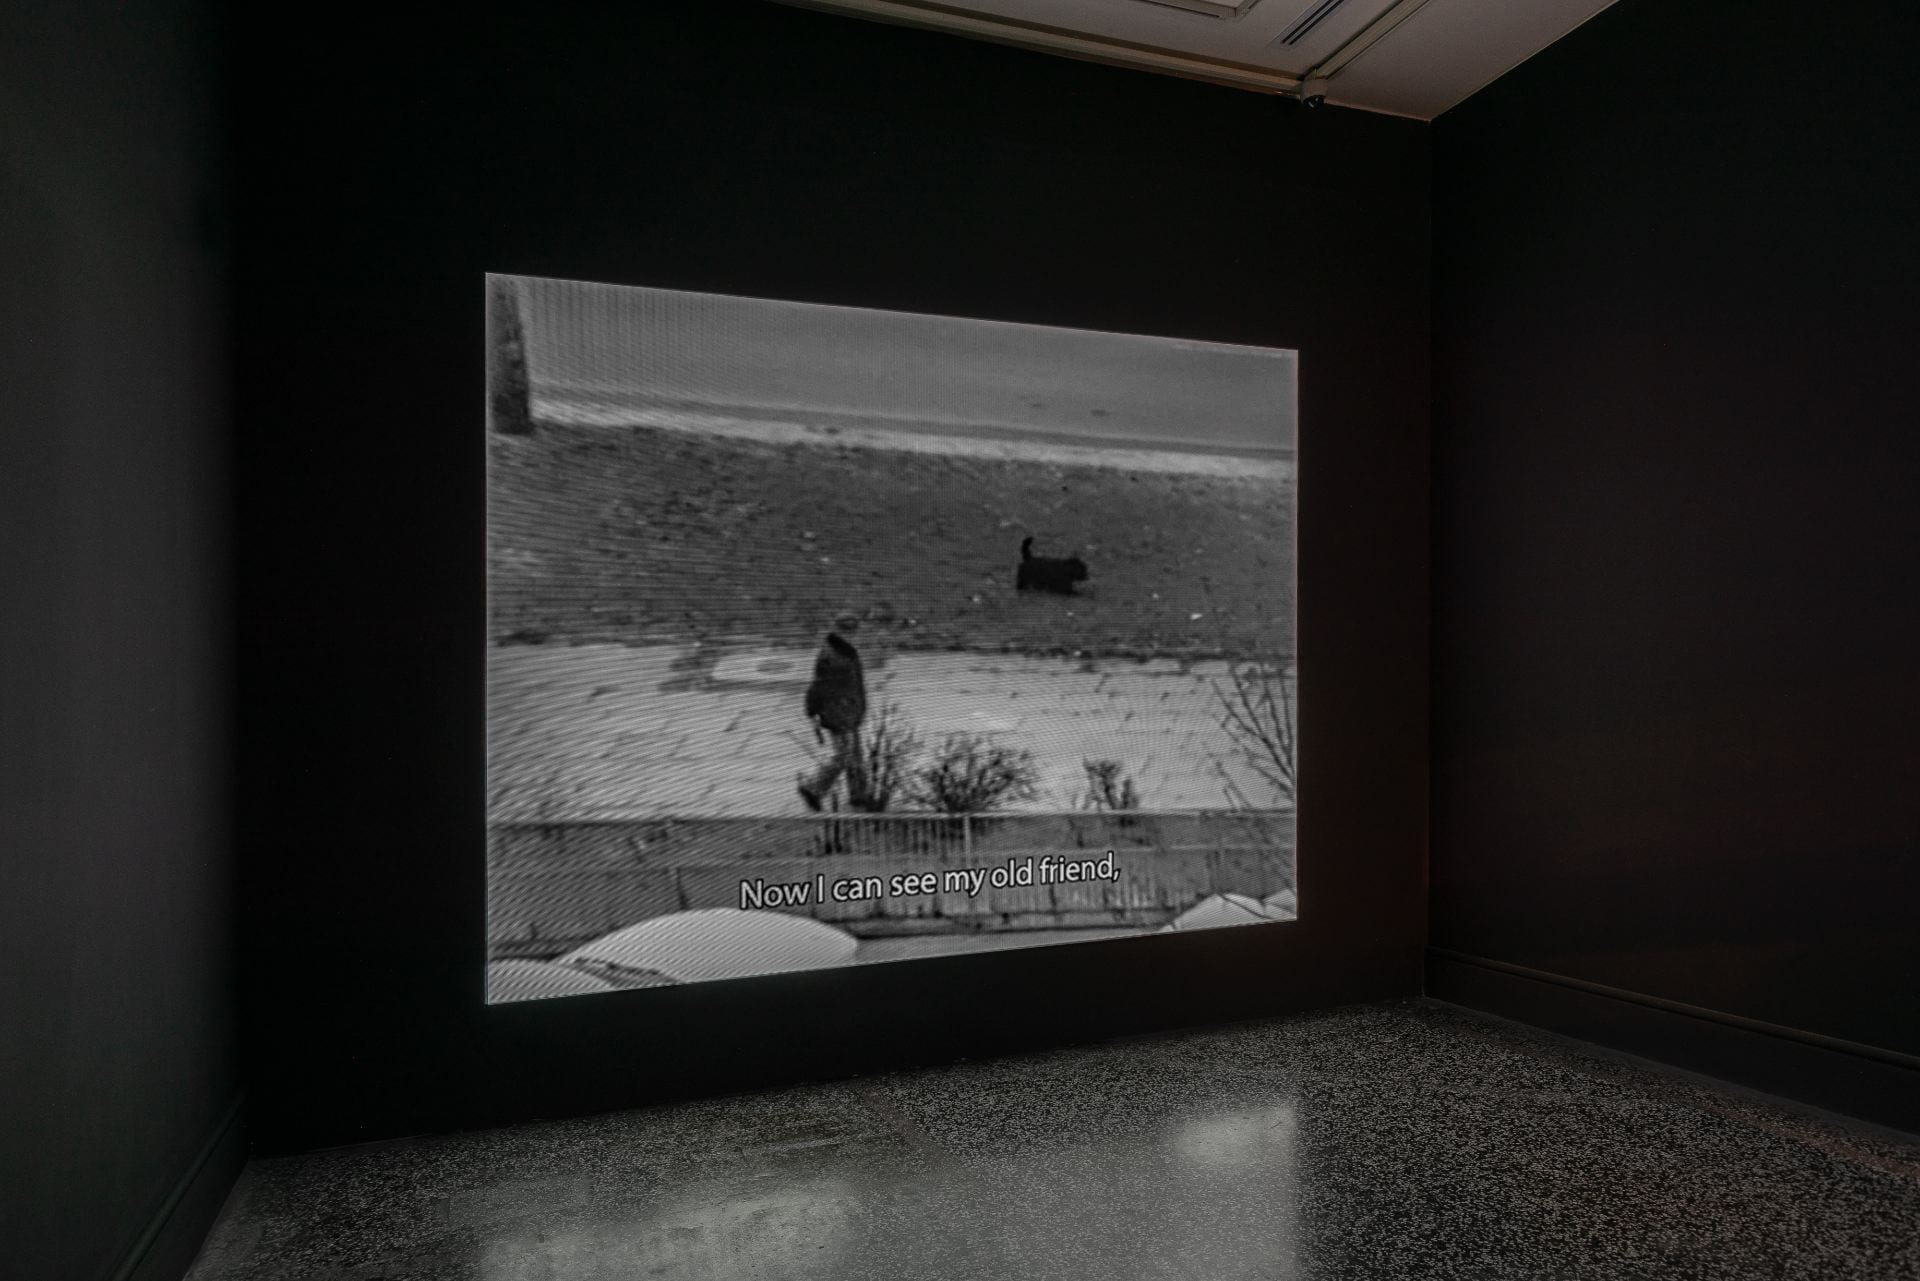 A dark room with a black and white film projected onto one wall. In the film a man walks with a little black dog. The film subtitles read "now I can see my old friend".